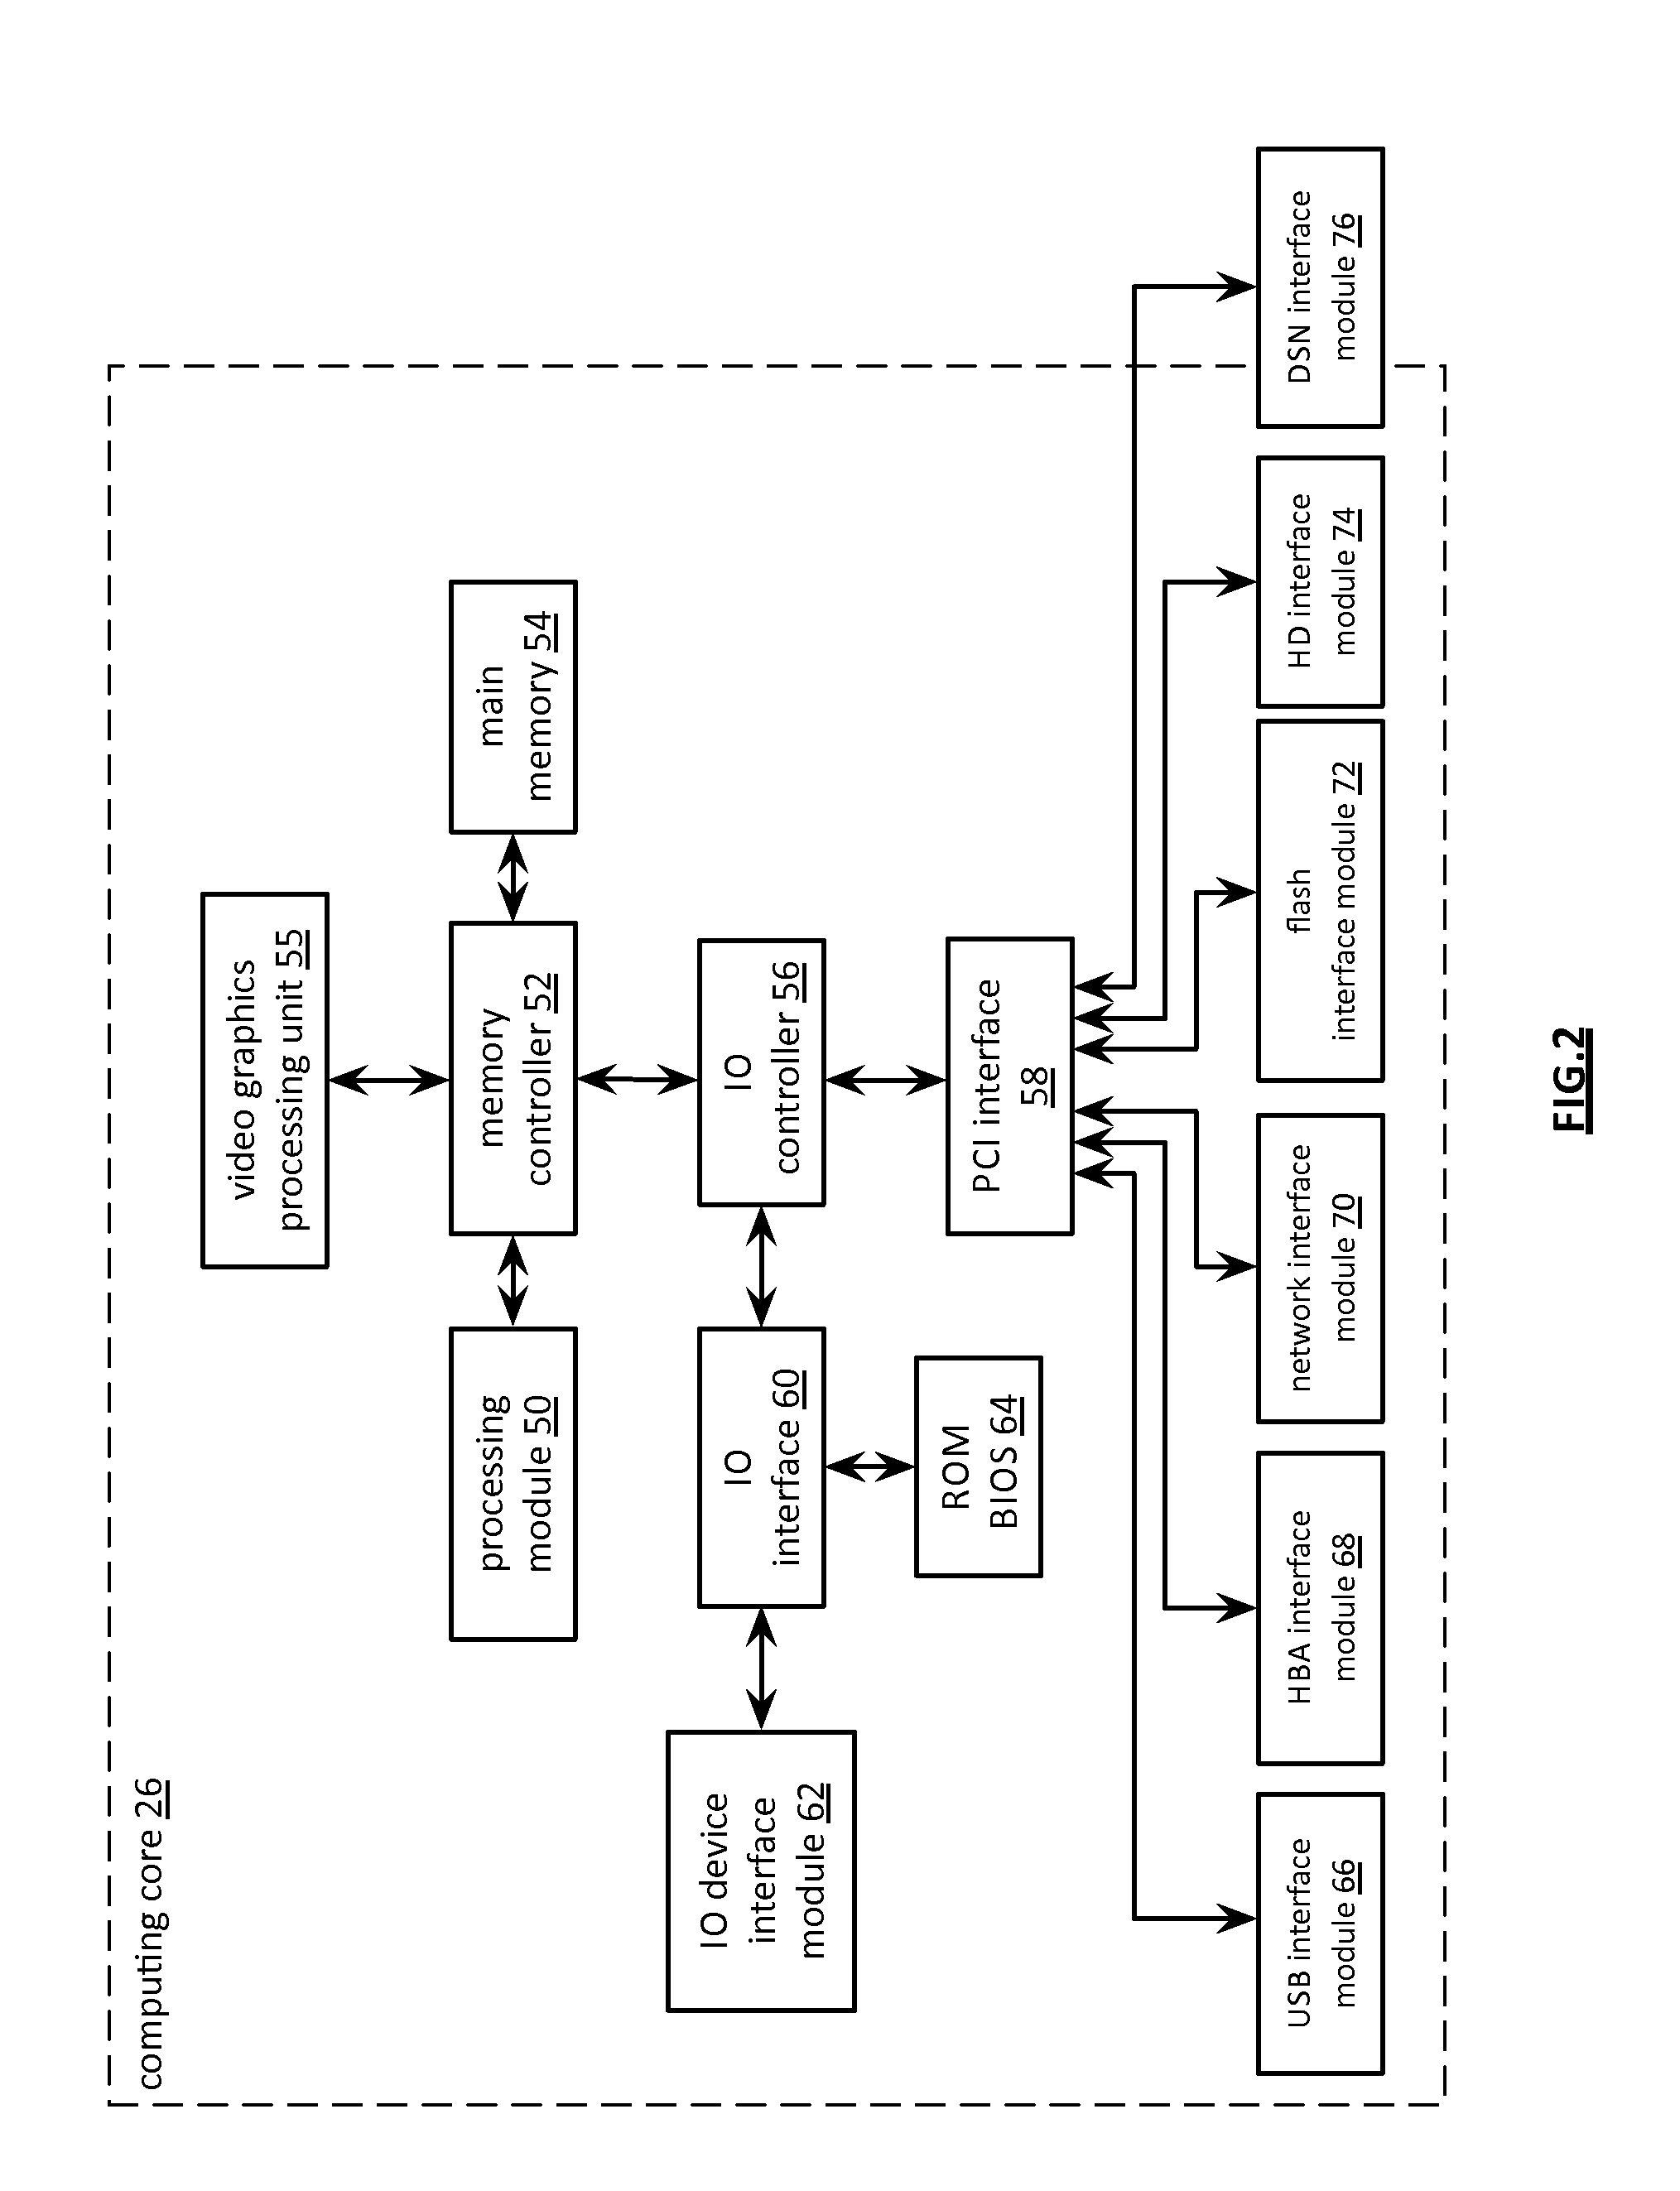 Utilizing local memory and dispersed storage memory to access encoded data slices